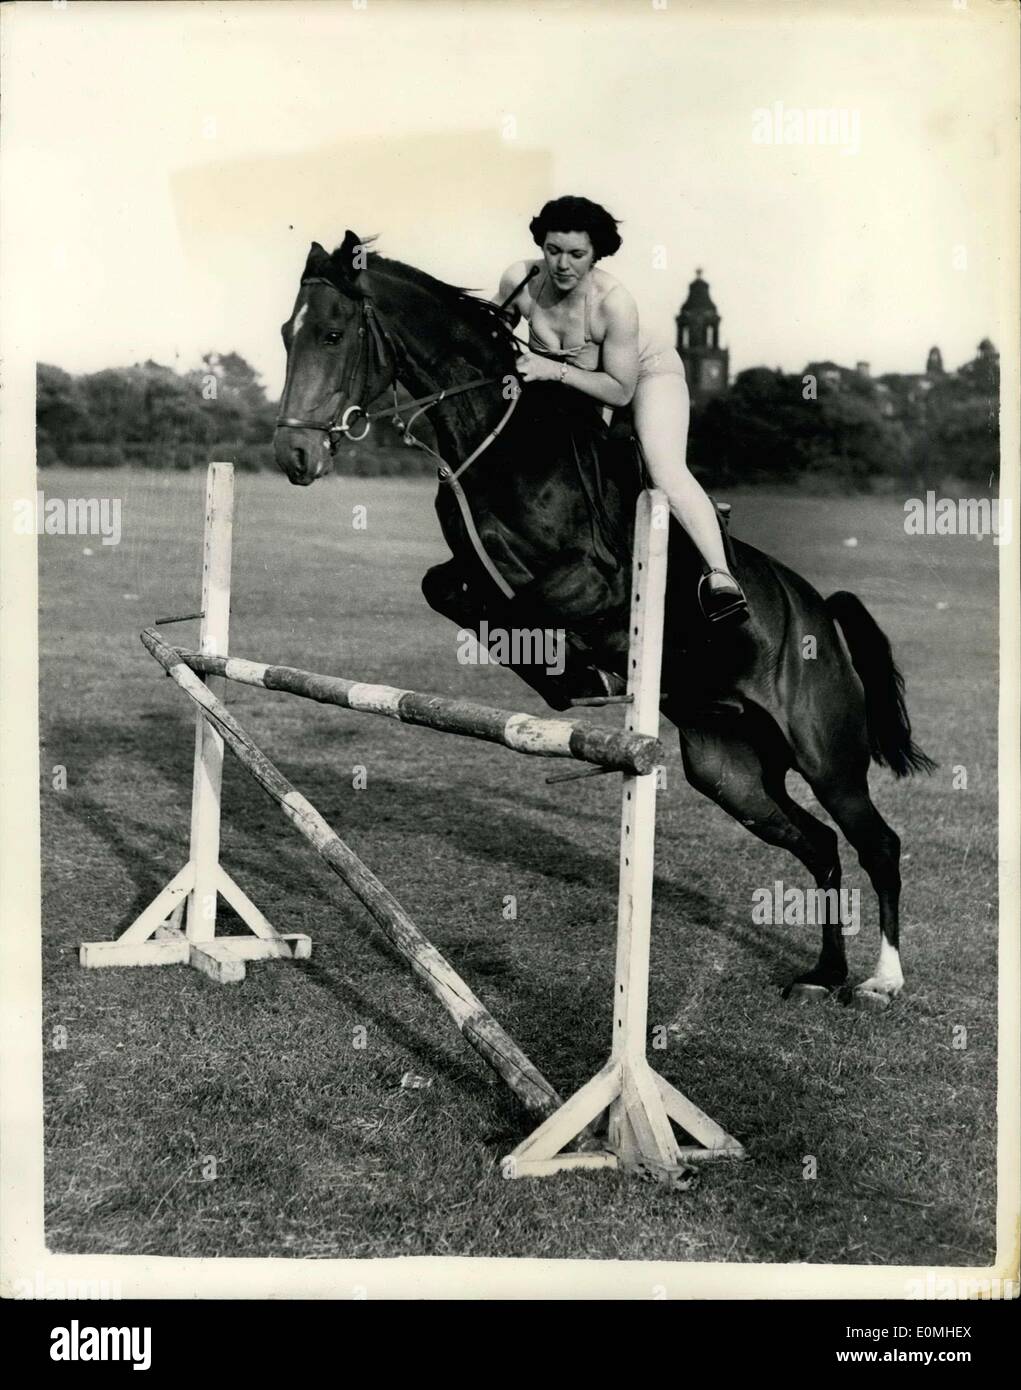 Jul. 16, 1955 - She Goes Horse Jumping In A Bathing Suit... One Way of Keeping Cool: Miss Margaret Podmore was taking part in a Stock Photo